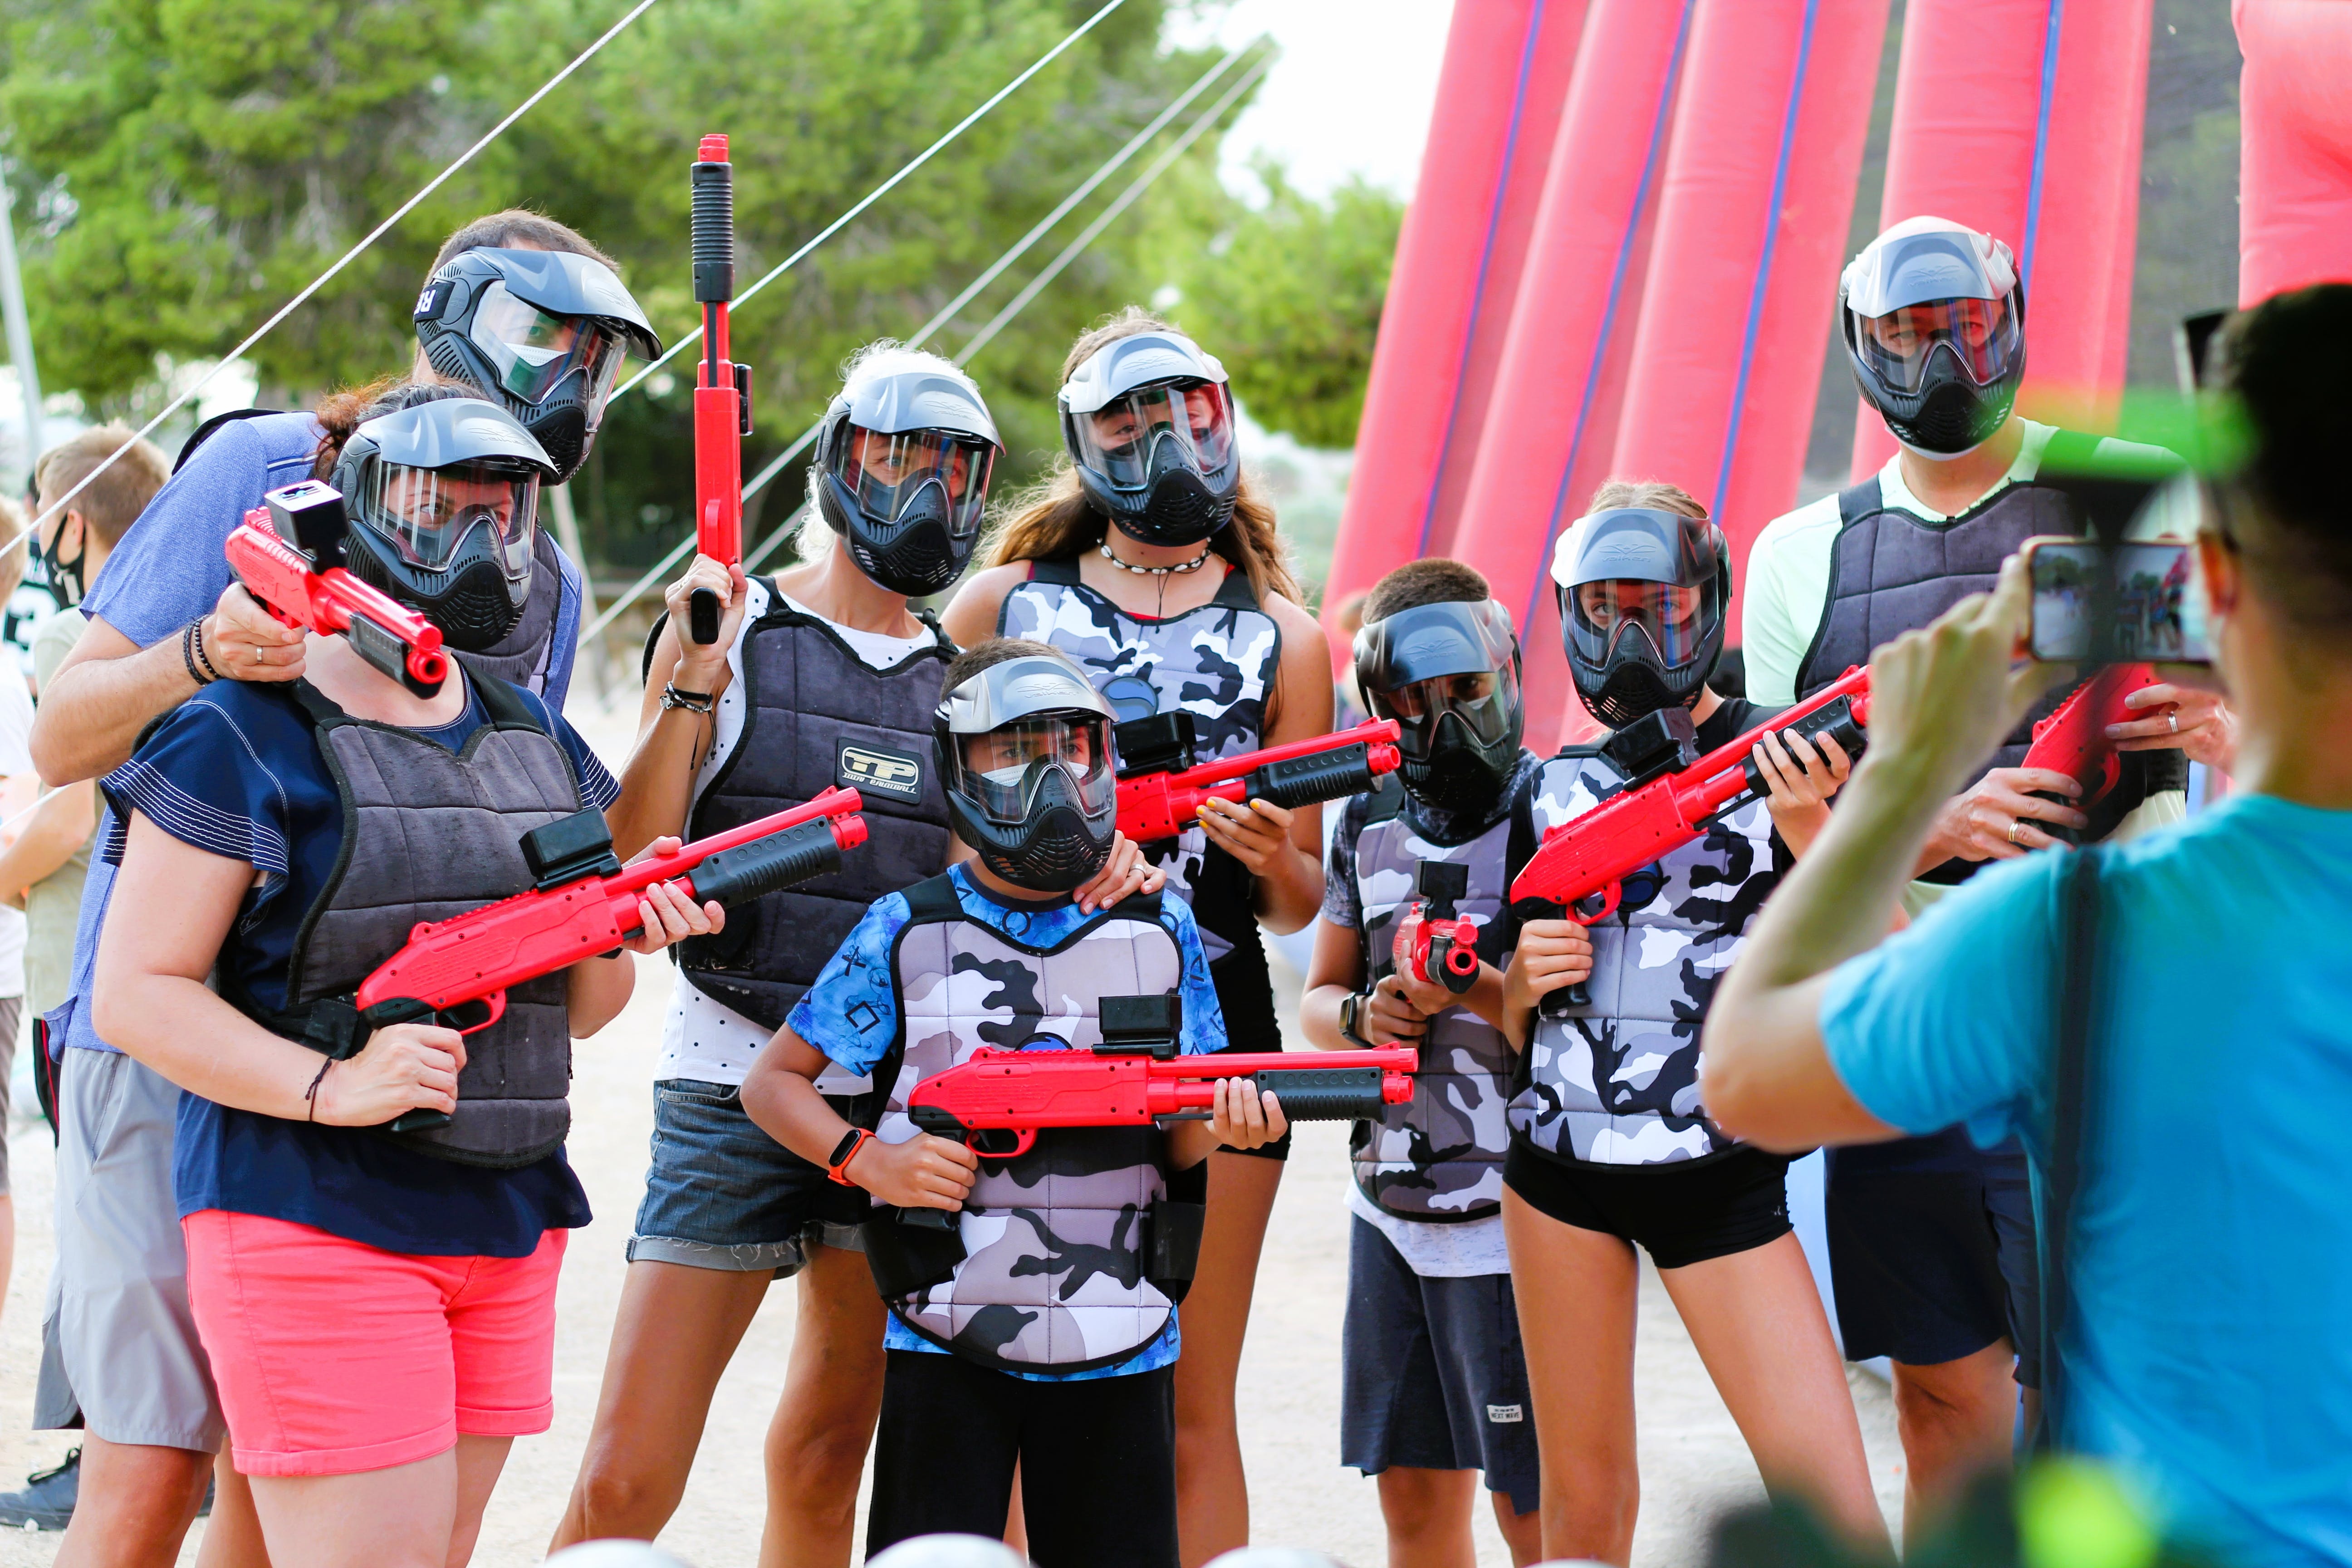 A photo of people playing paintball. | Source: Pexels